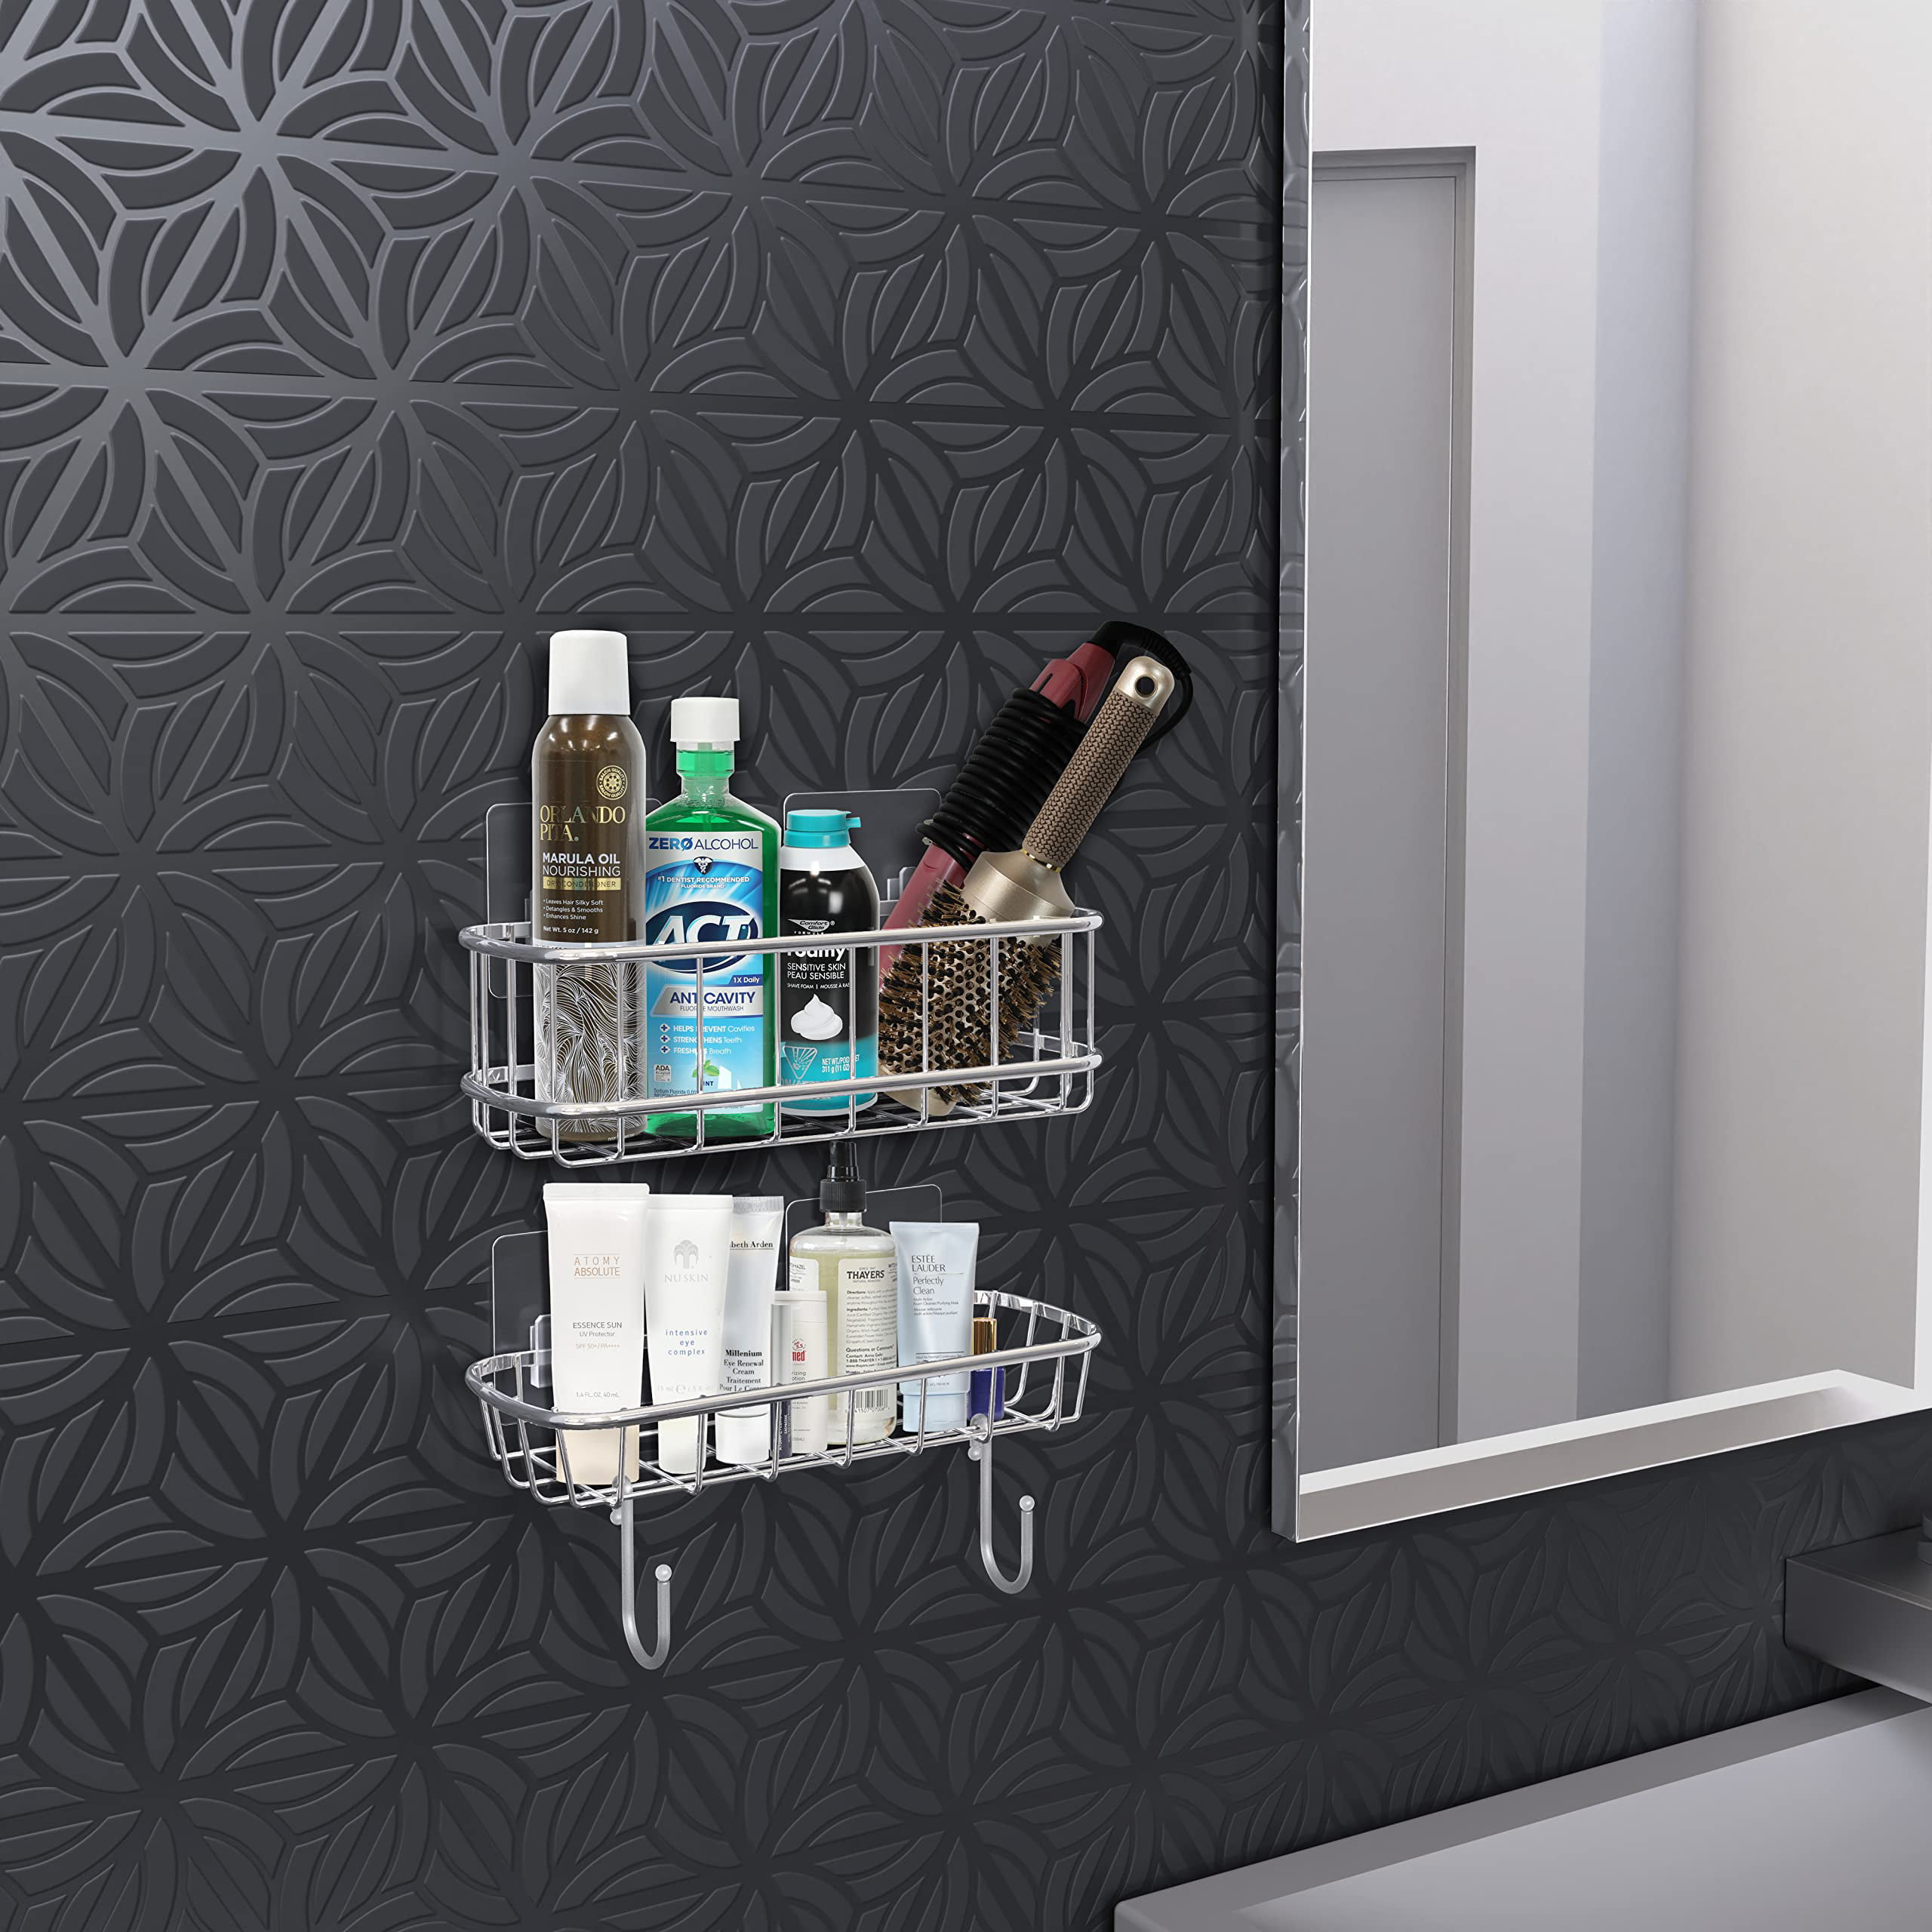 2-Pack Adhesive Shower Caddy Shelf – Growing Home